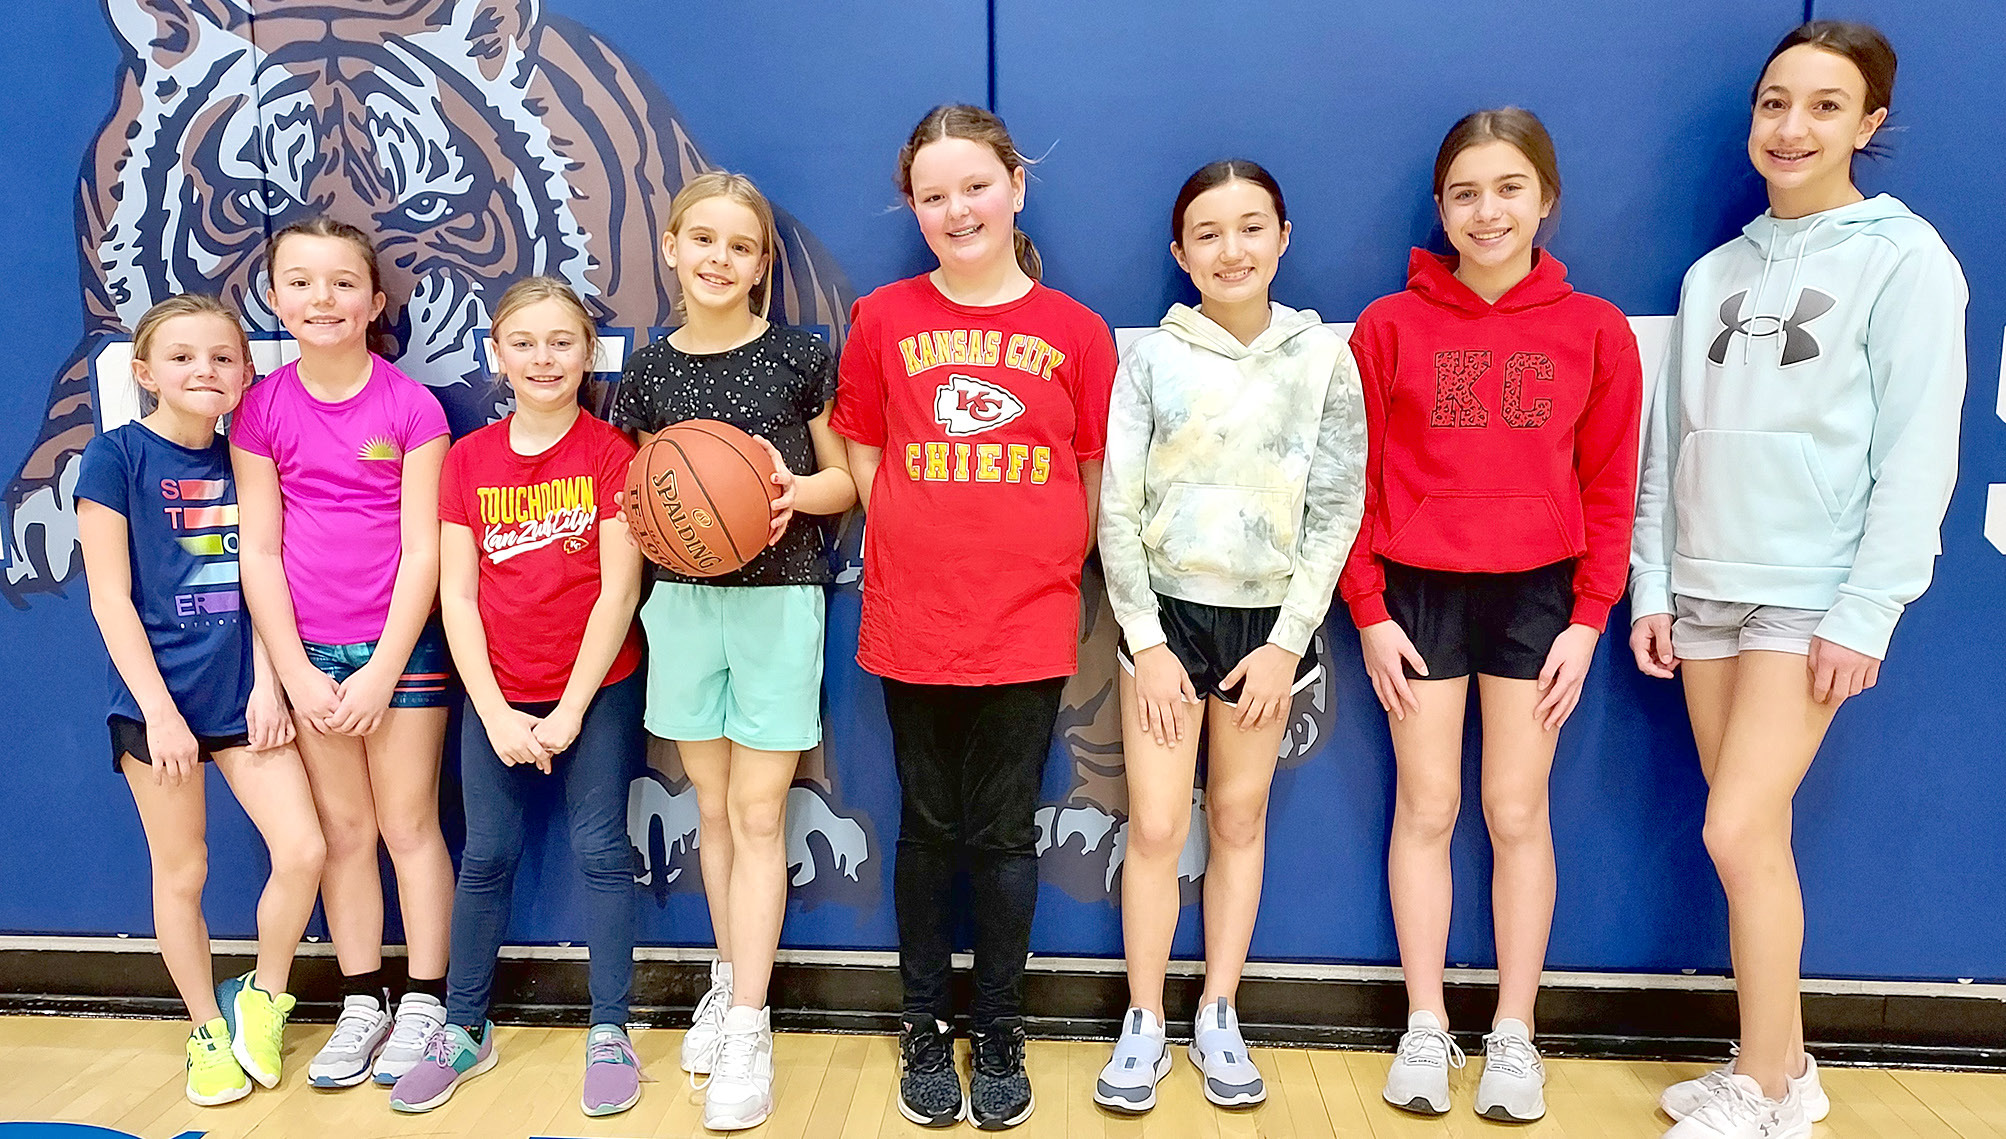 EIGHT GIRLS participated in the St. Thomas Knights of Columbus Free Throw Contest on Sunday, January 28th. Pictured are (from left) Norah Muir, Cambry Glendening, Emery Peterson, Makinley Riener, Tessa Look, Corbyn Glendening, Harper Lowry, and Jenna Berland.